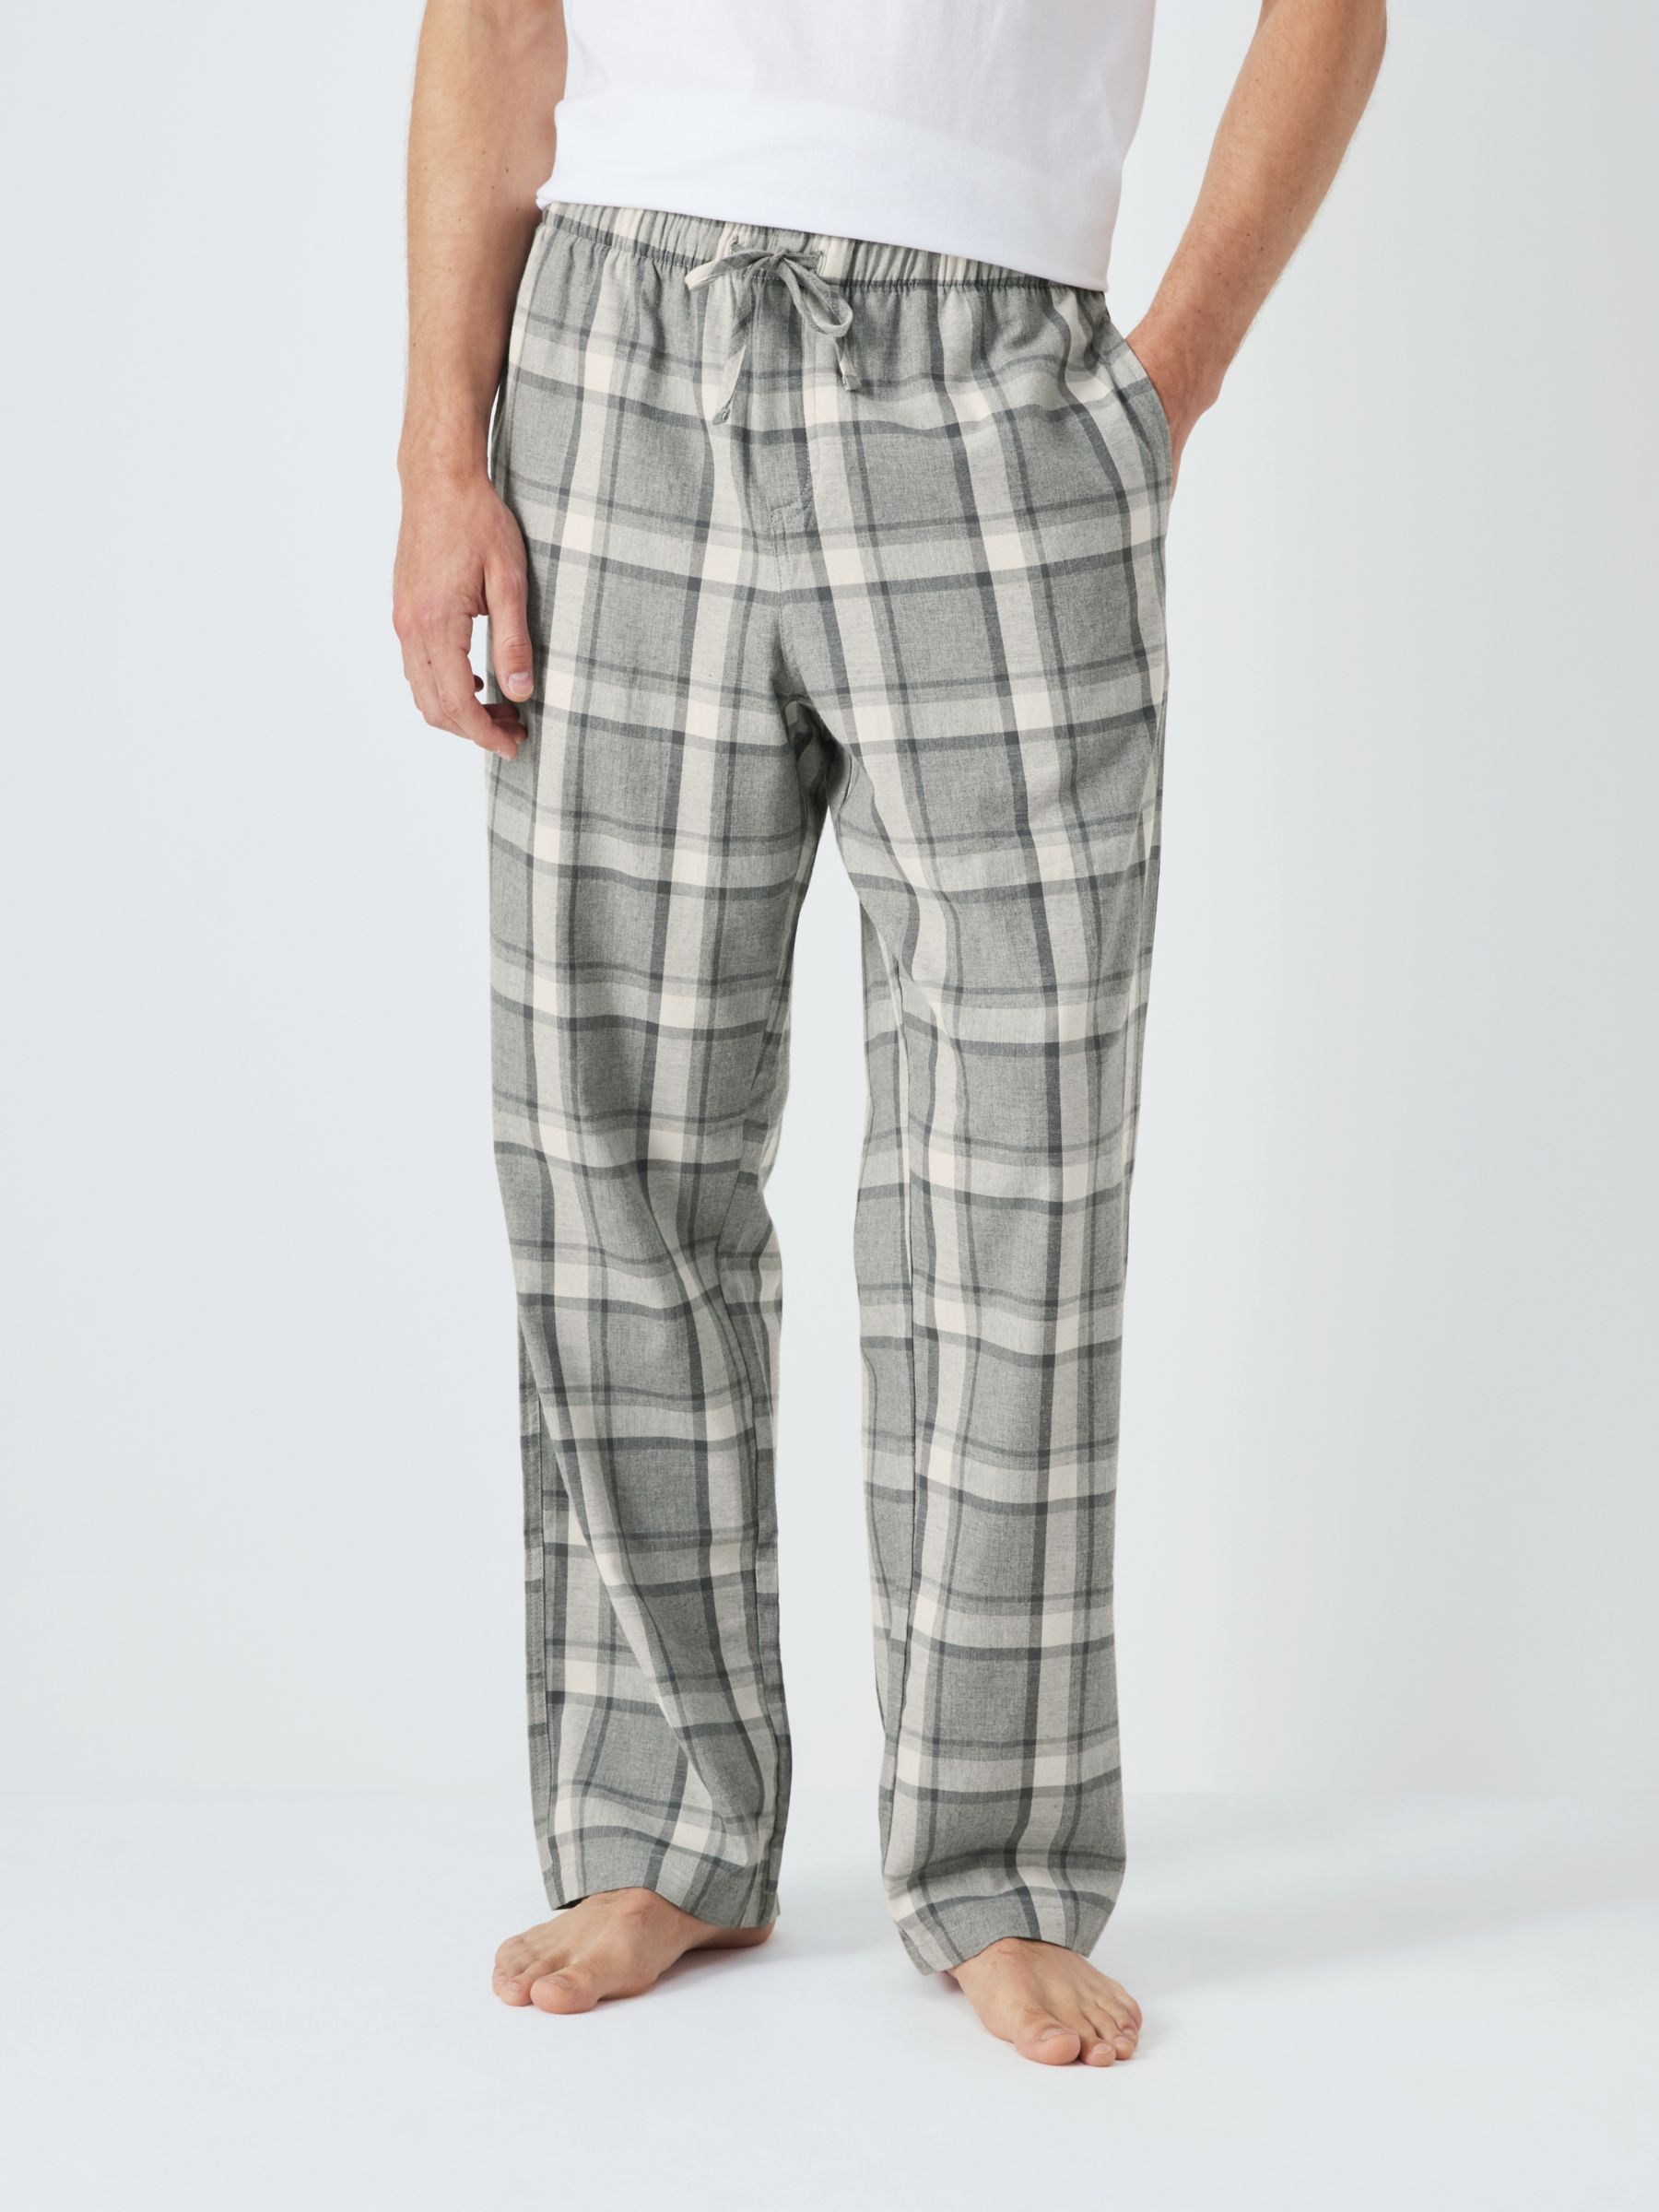 2 Pack PJ Bottoms at Cotton Traders